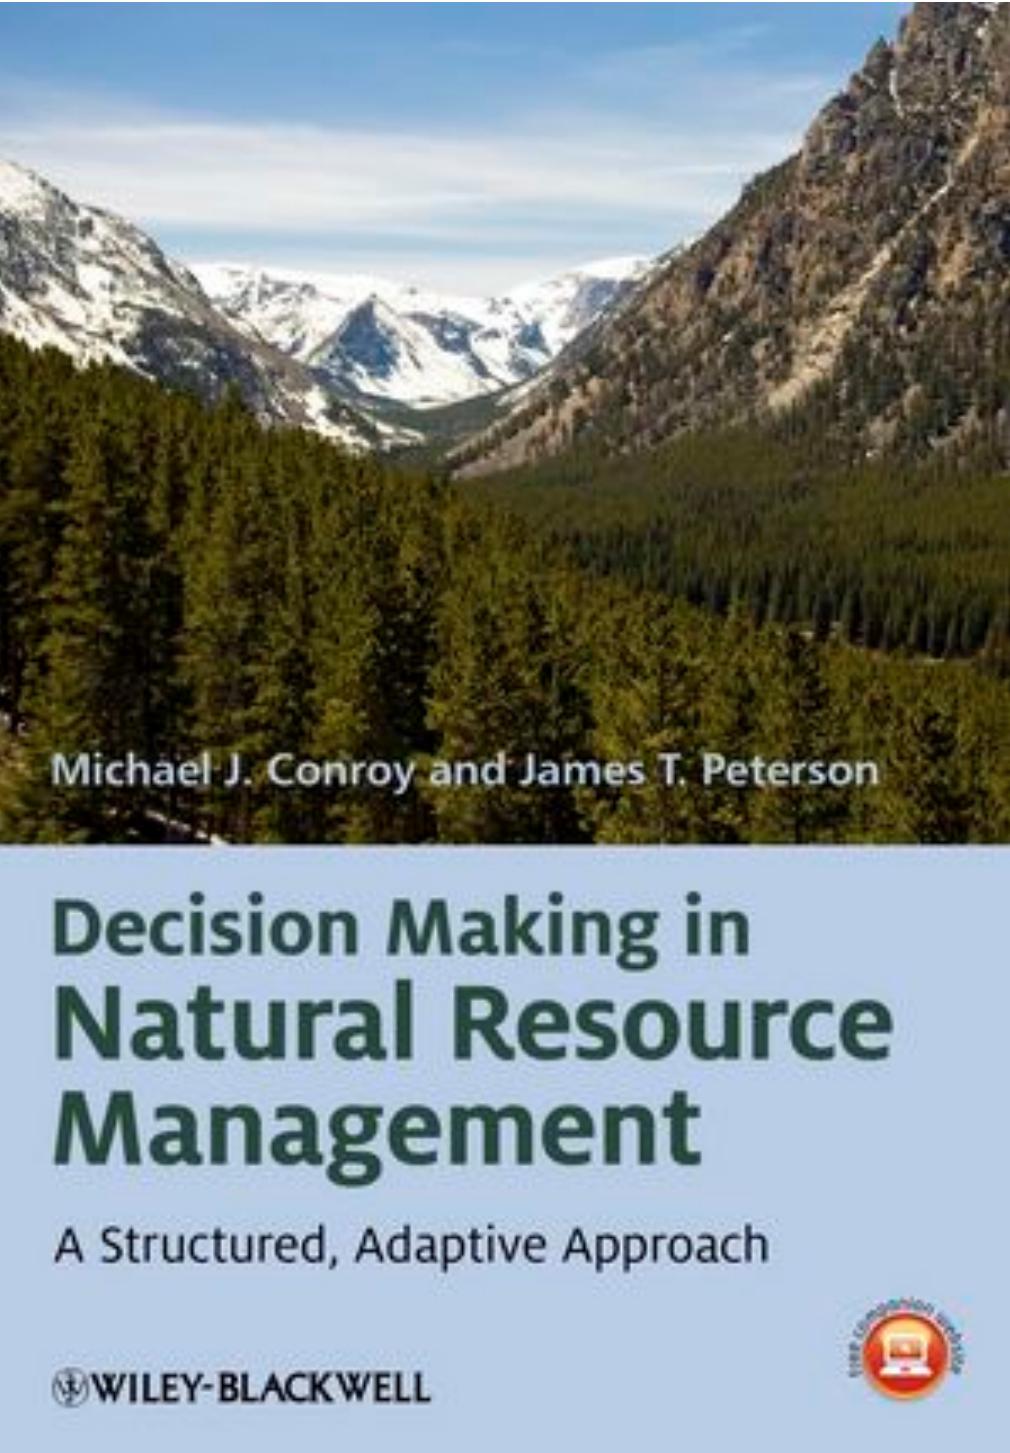 Decision Making in Natural Resource Management-A Structured,Adaptive Approach.jpg